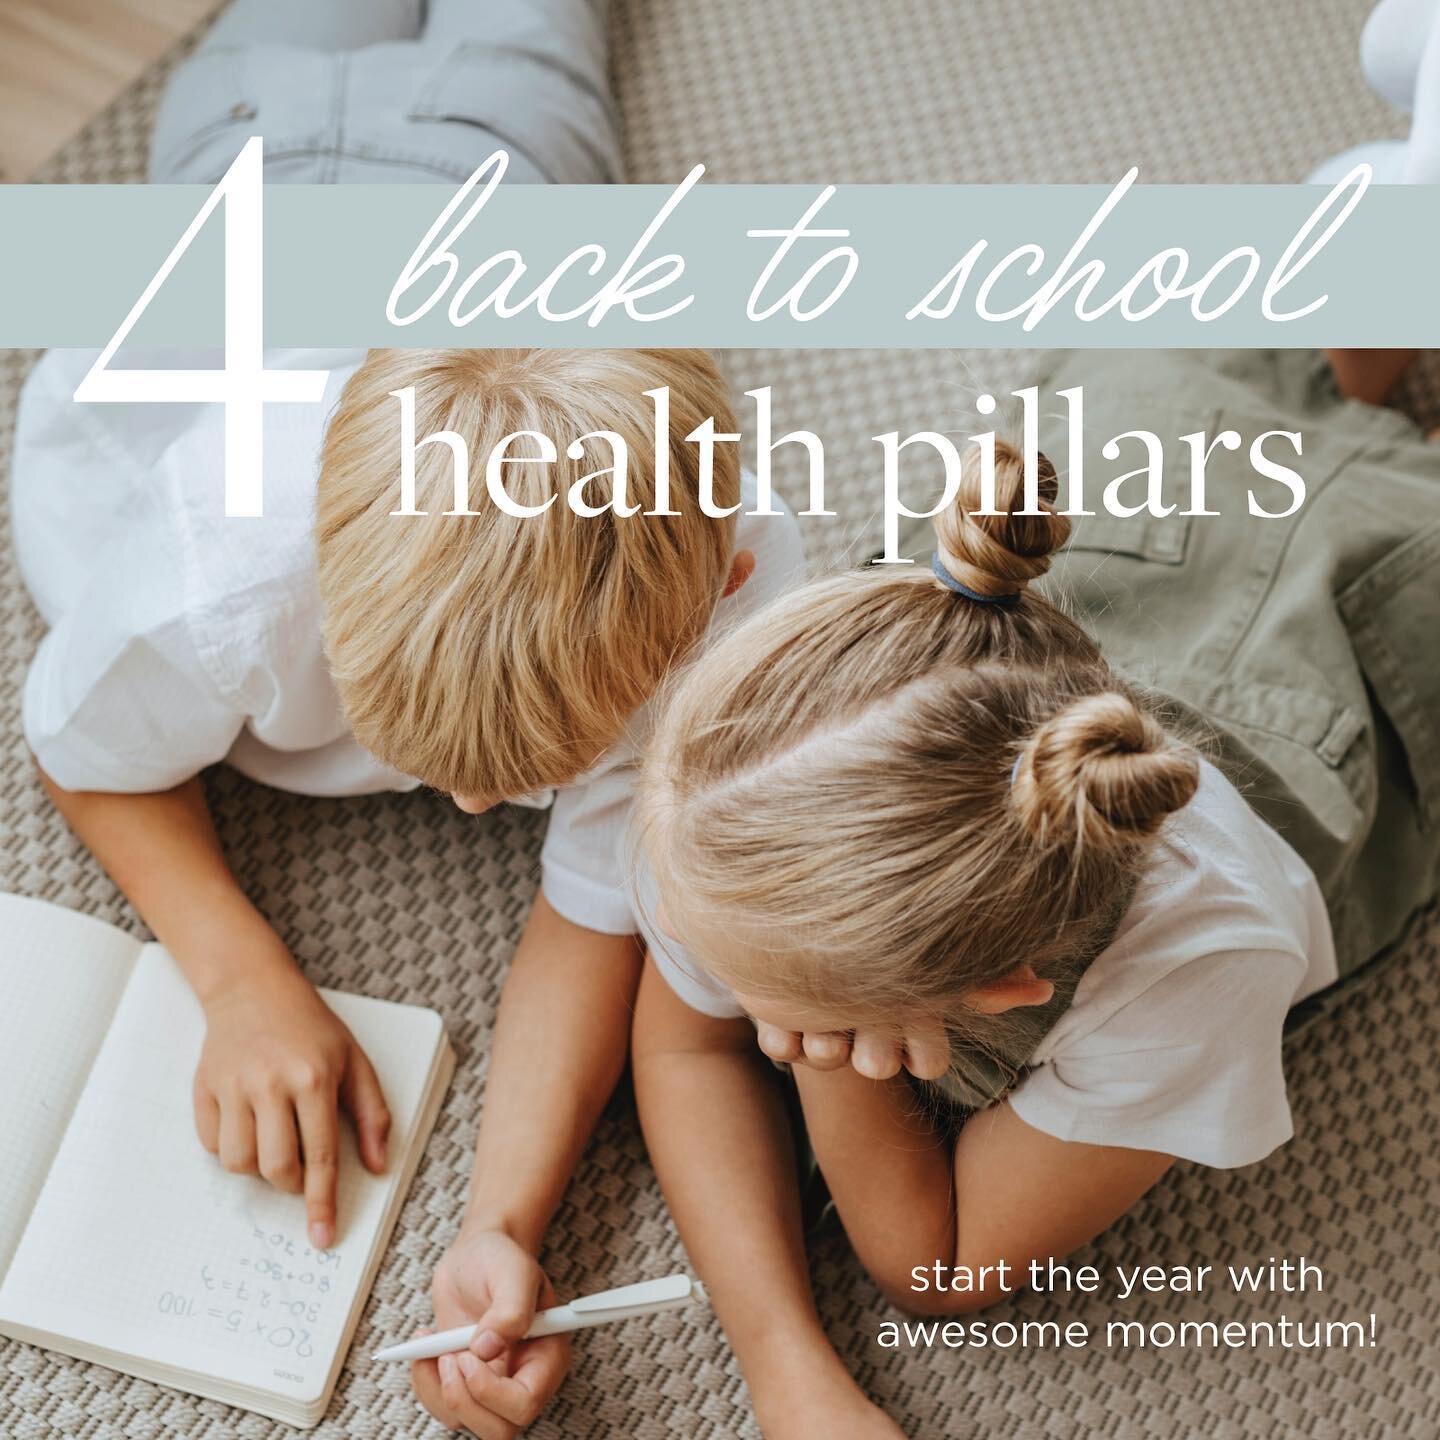 4 Back to School Health Pillars to start the year with awesome momentum! ✨📚

If you're aiming for your child to have the best school year yet, including awesome behavior, focus, learning, adaptability, and fewer immune struggles, check out these 4 s